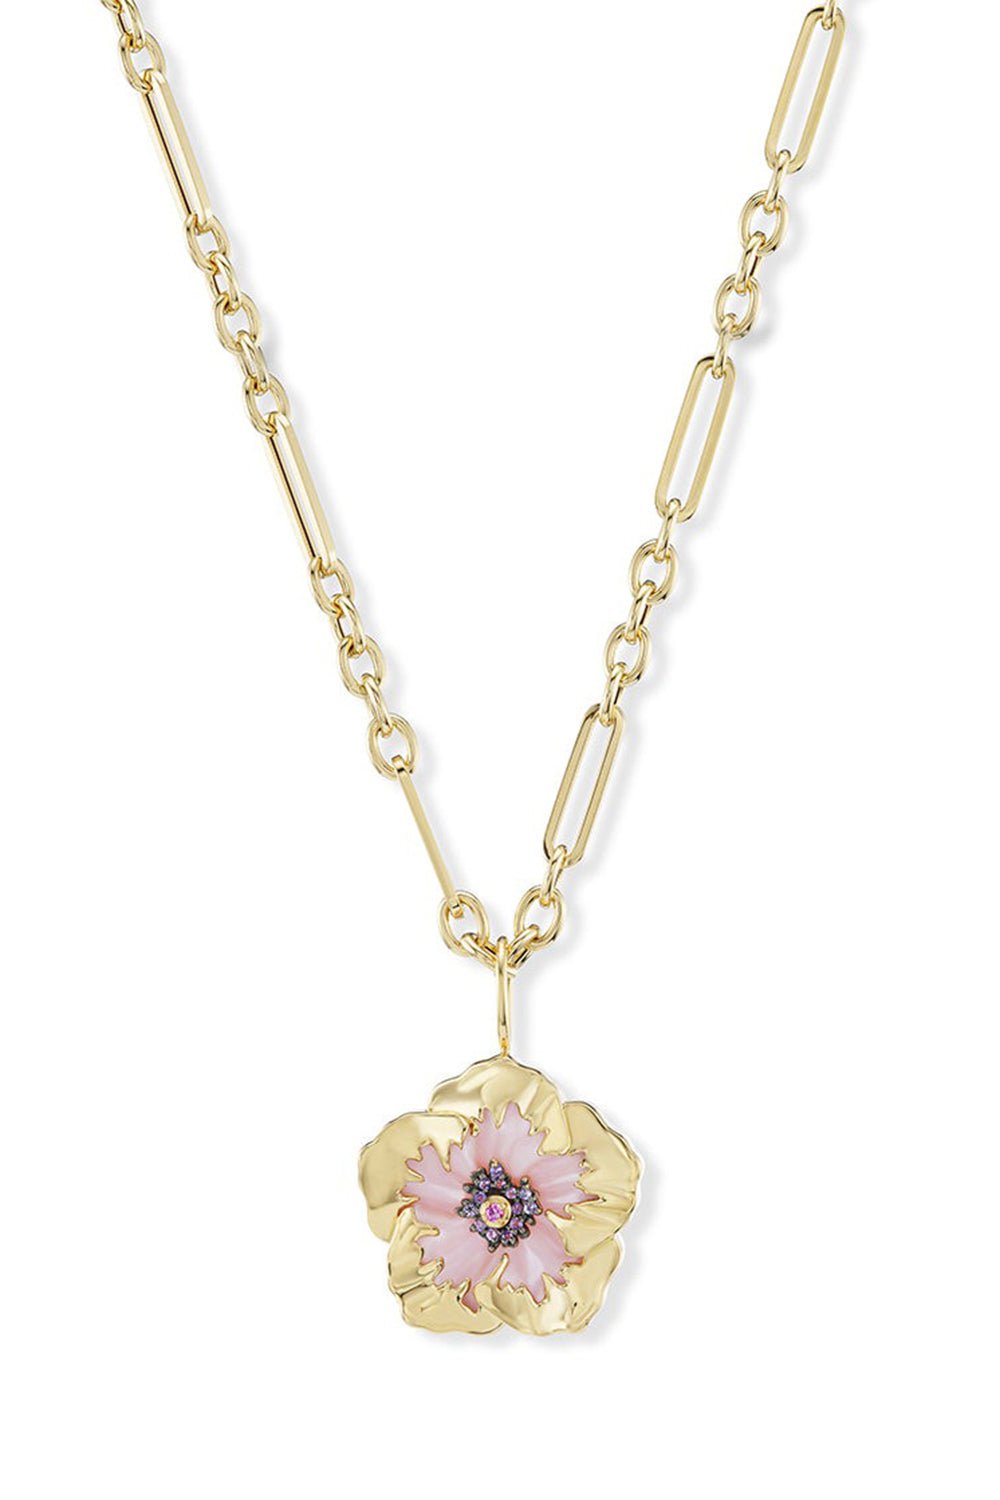 BRENT NEALE-Small Hibiscus Pendant Necklace-YELLOW GOLD